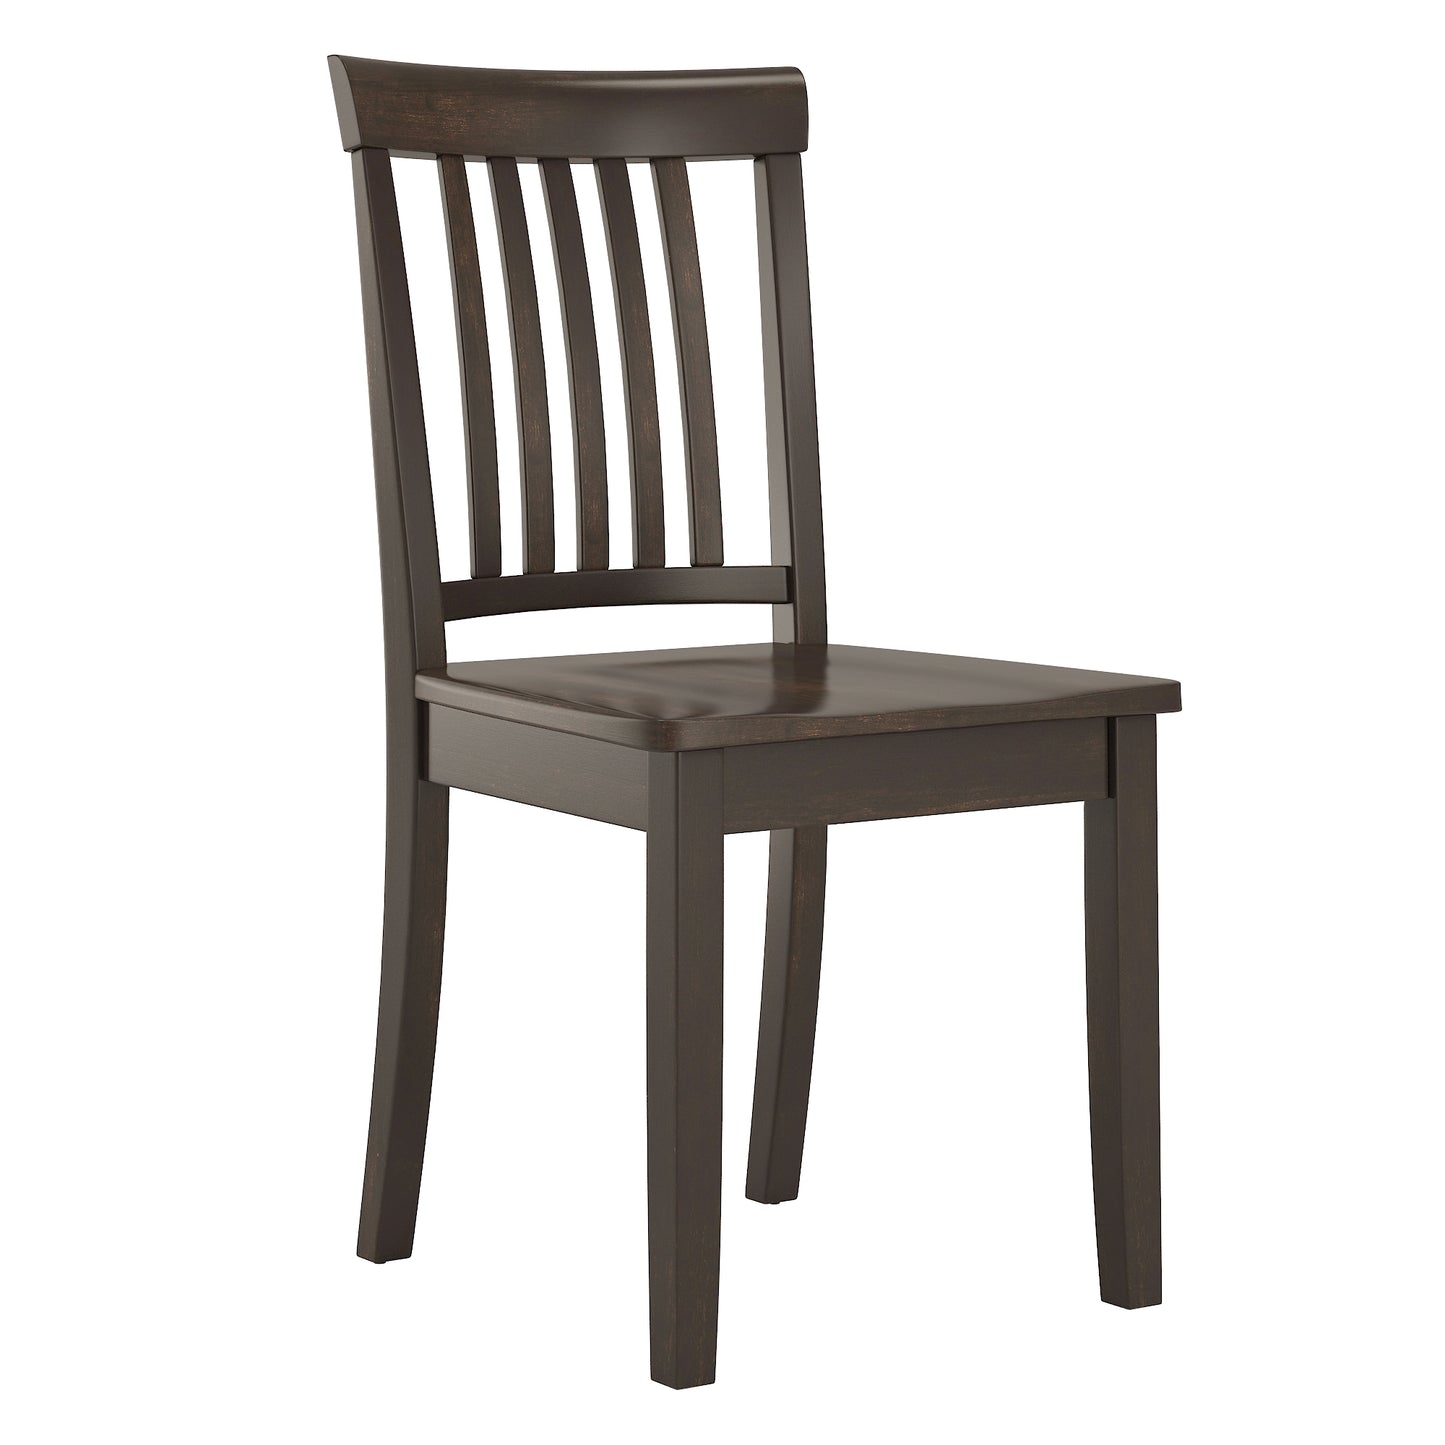 Mission Back Wood Dining Chairs (Set of 2) - Antique Black Finish